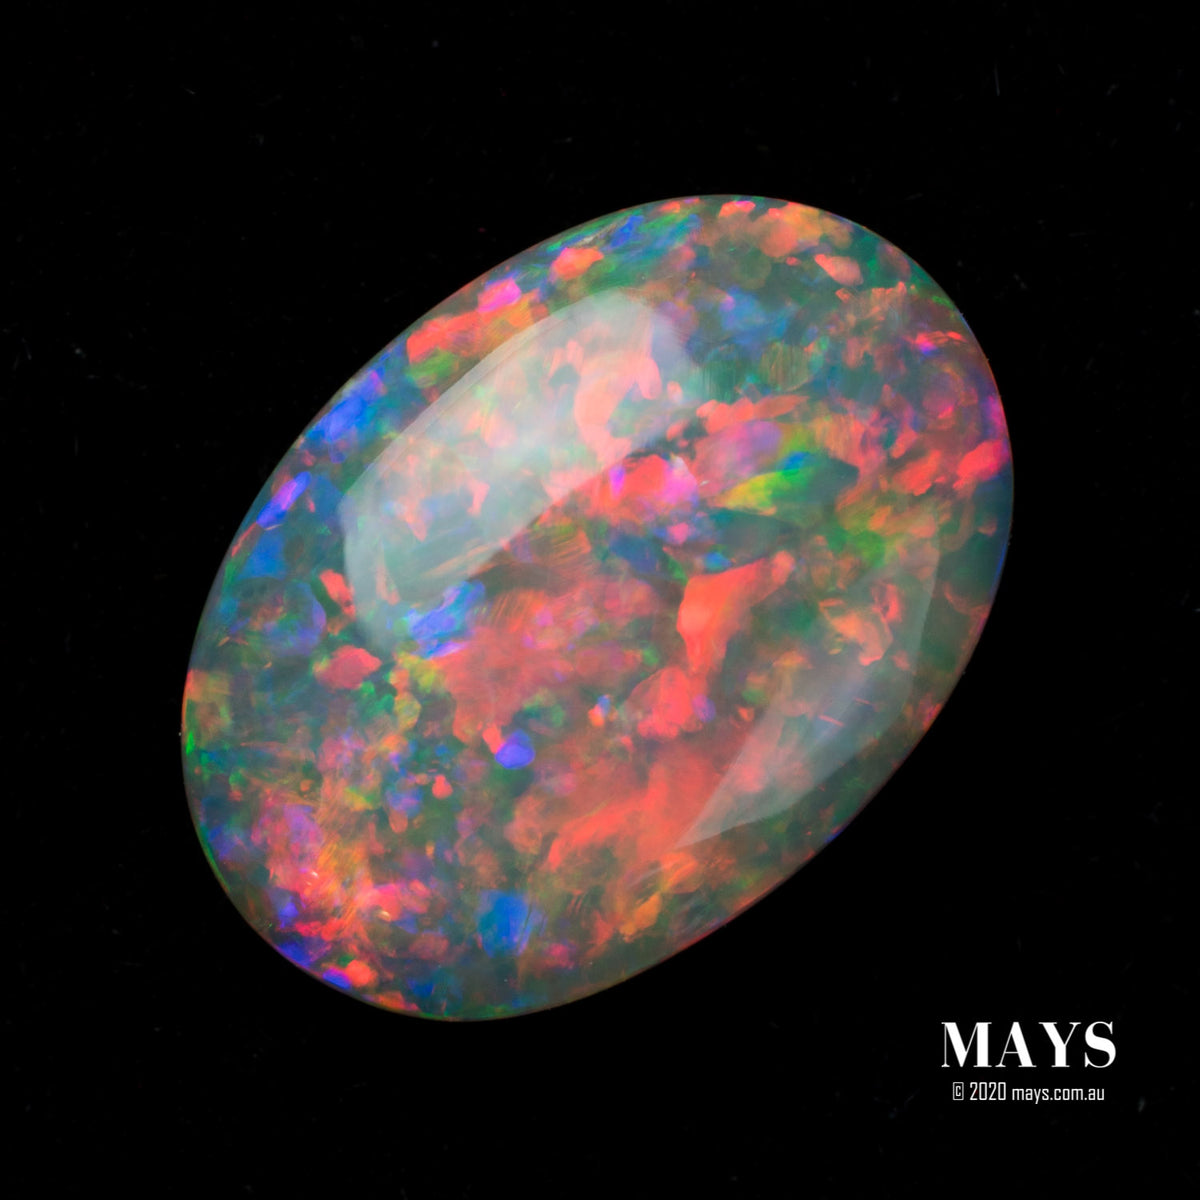 1.80ct Natural Solid Black Opal with Fluoro Orange and Red Colours - MAYS